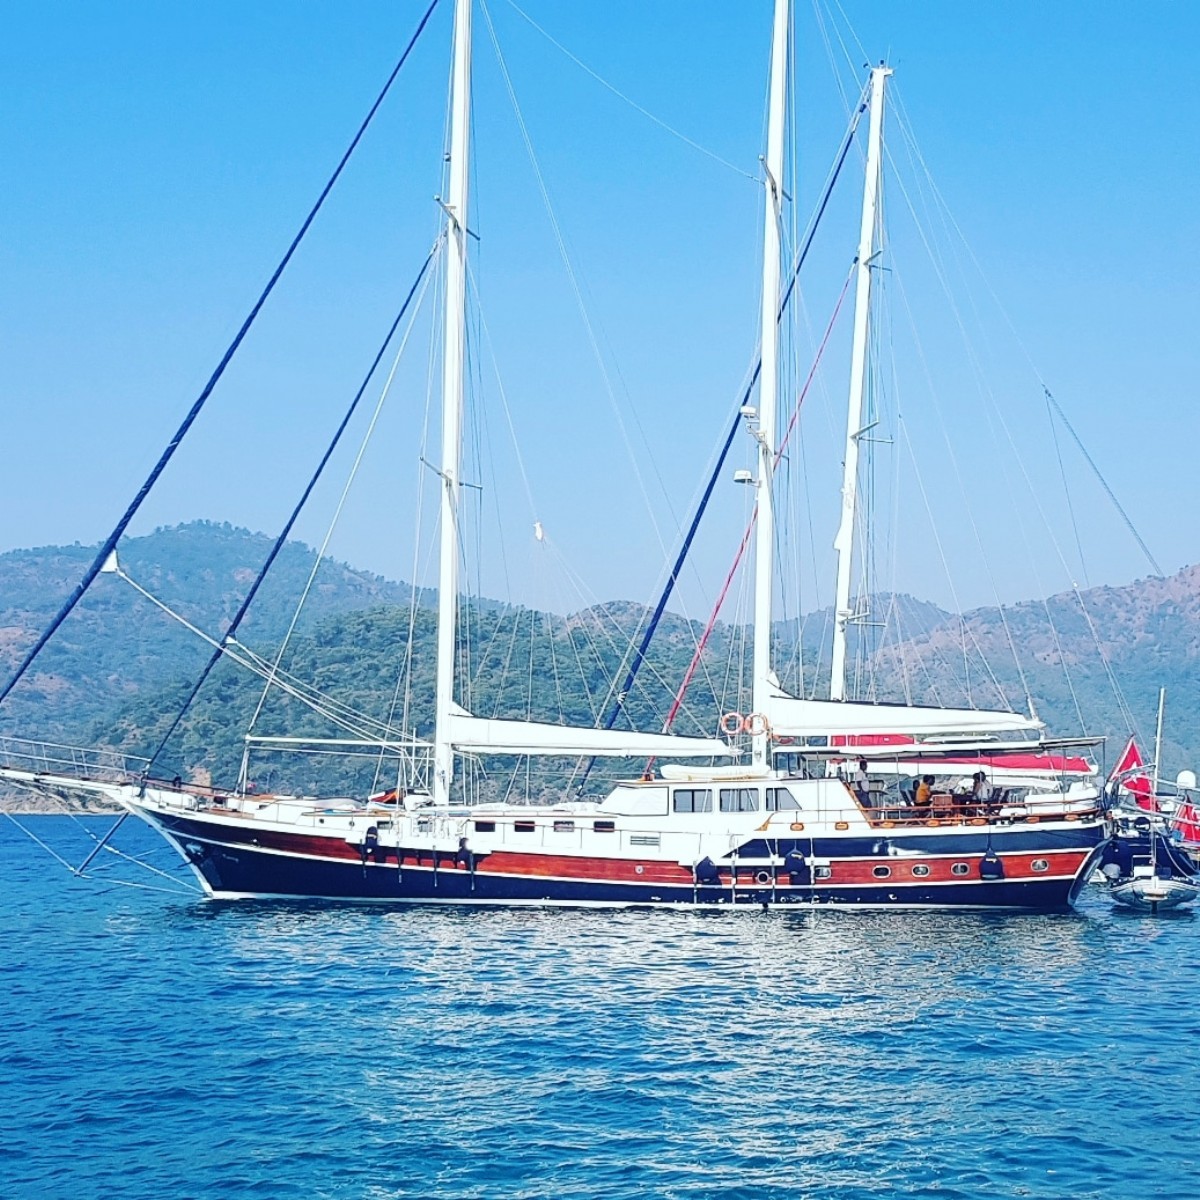 Deluxe Gulets | Gulet Charter D515 Deluxury Gulet Yacht For 10 People | D515 | private yacht cruises, airbnb yacht rental, private boat, Yacht charter Turkey, Gulet charter, Yachting Turkey, gulet Turkey, yacht rentals Turkey, boat charter Turkey, Bodrum luxury yacht charter, deluxury yacht charter, deluxury gulet rental, Kanarya  | 